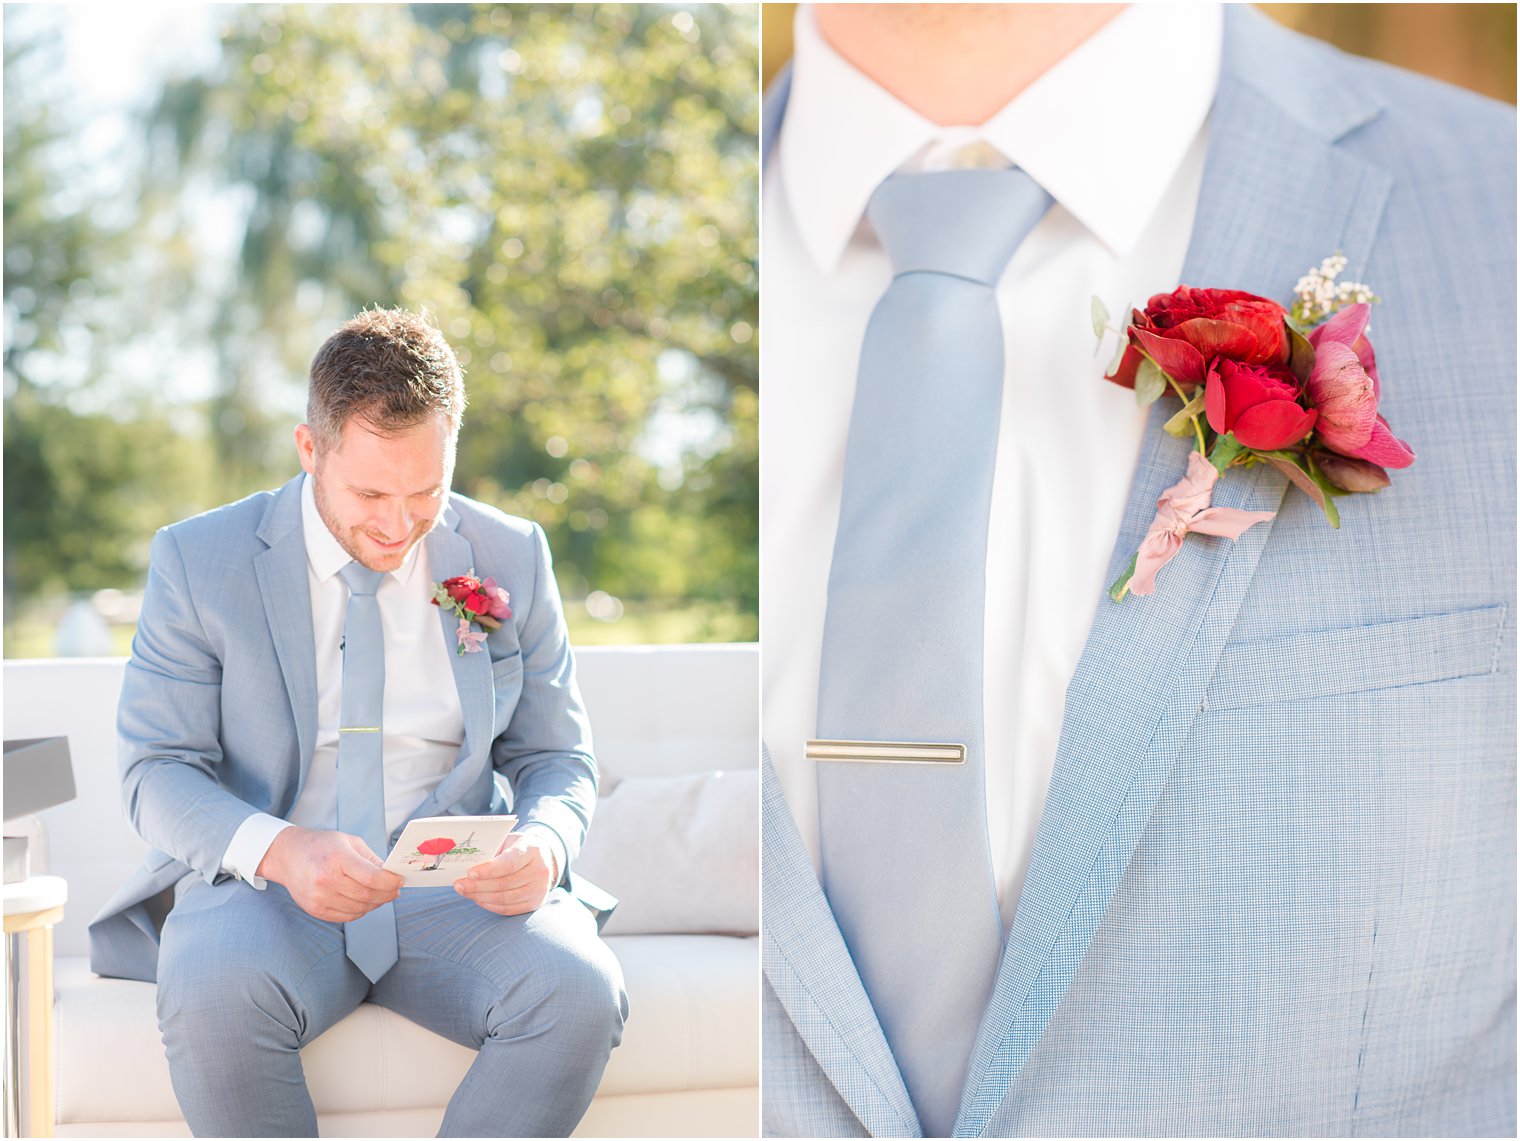 groom in light blue suit reads gift from bride on wedding day morning